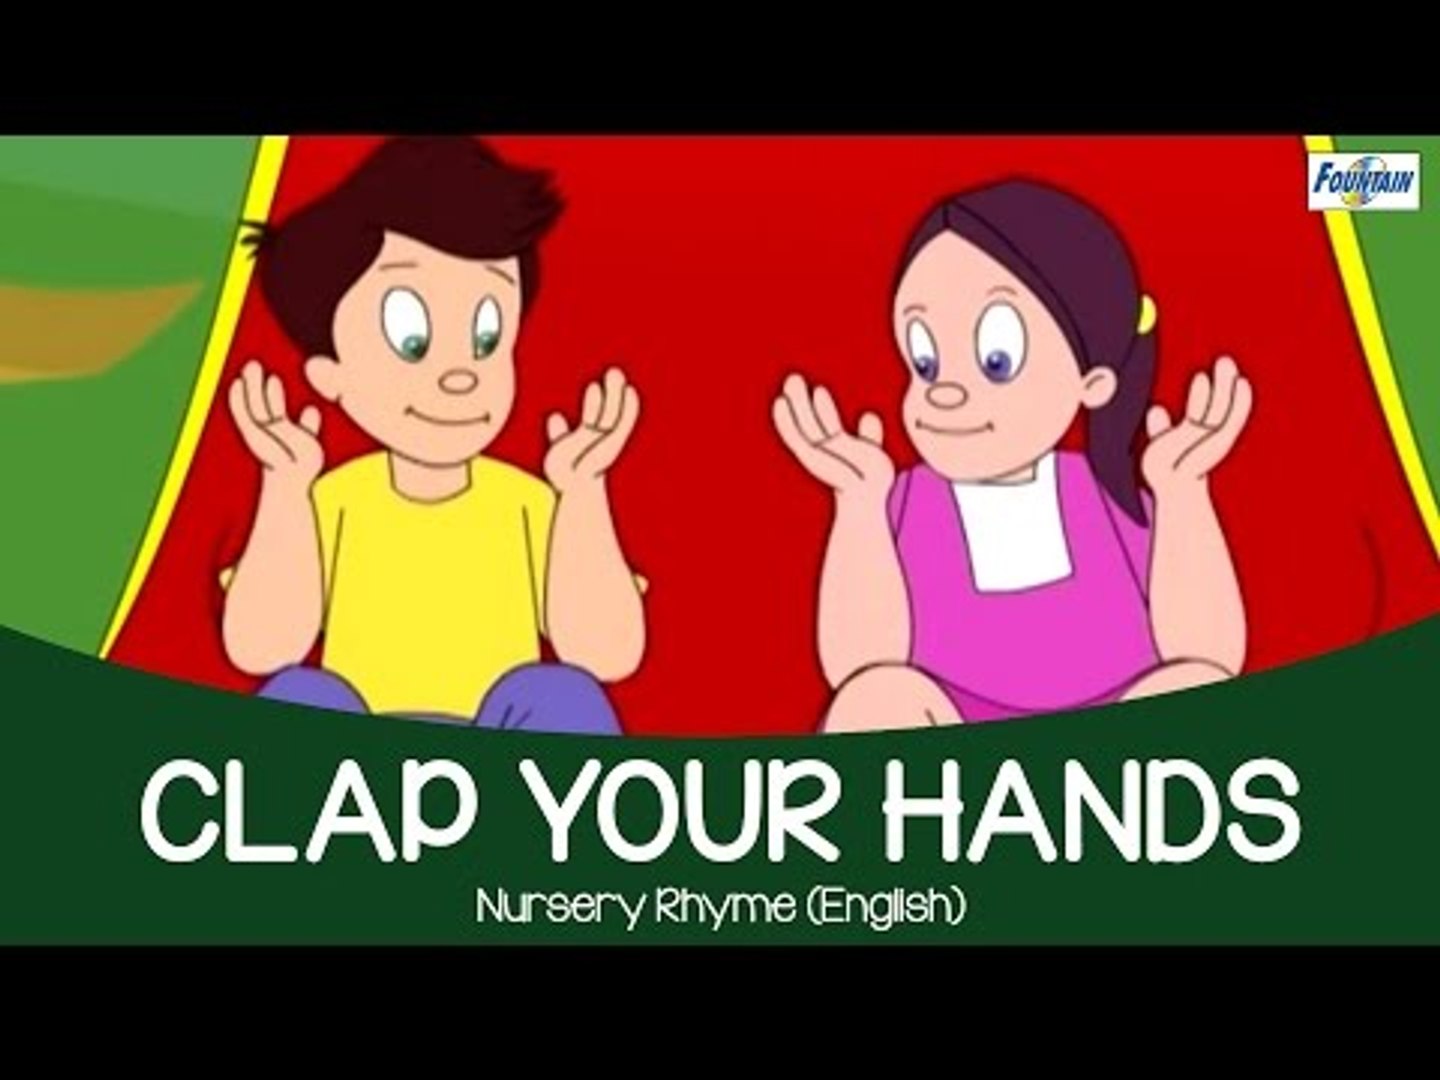 Can you clap your hands. Clap your hands картинка. Clap your hands Song for Kids. Clap your hands Nursery Rhyme. Clap your hands listen to the Music and Clap your hands.